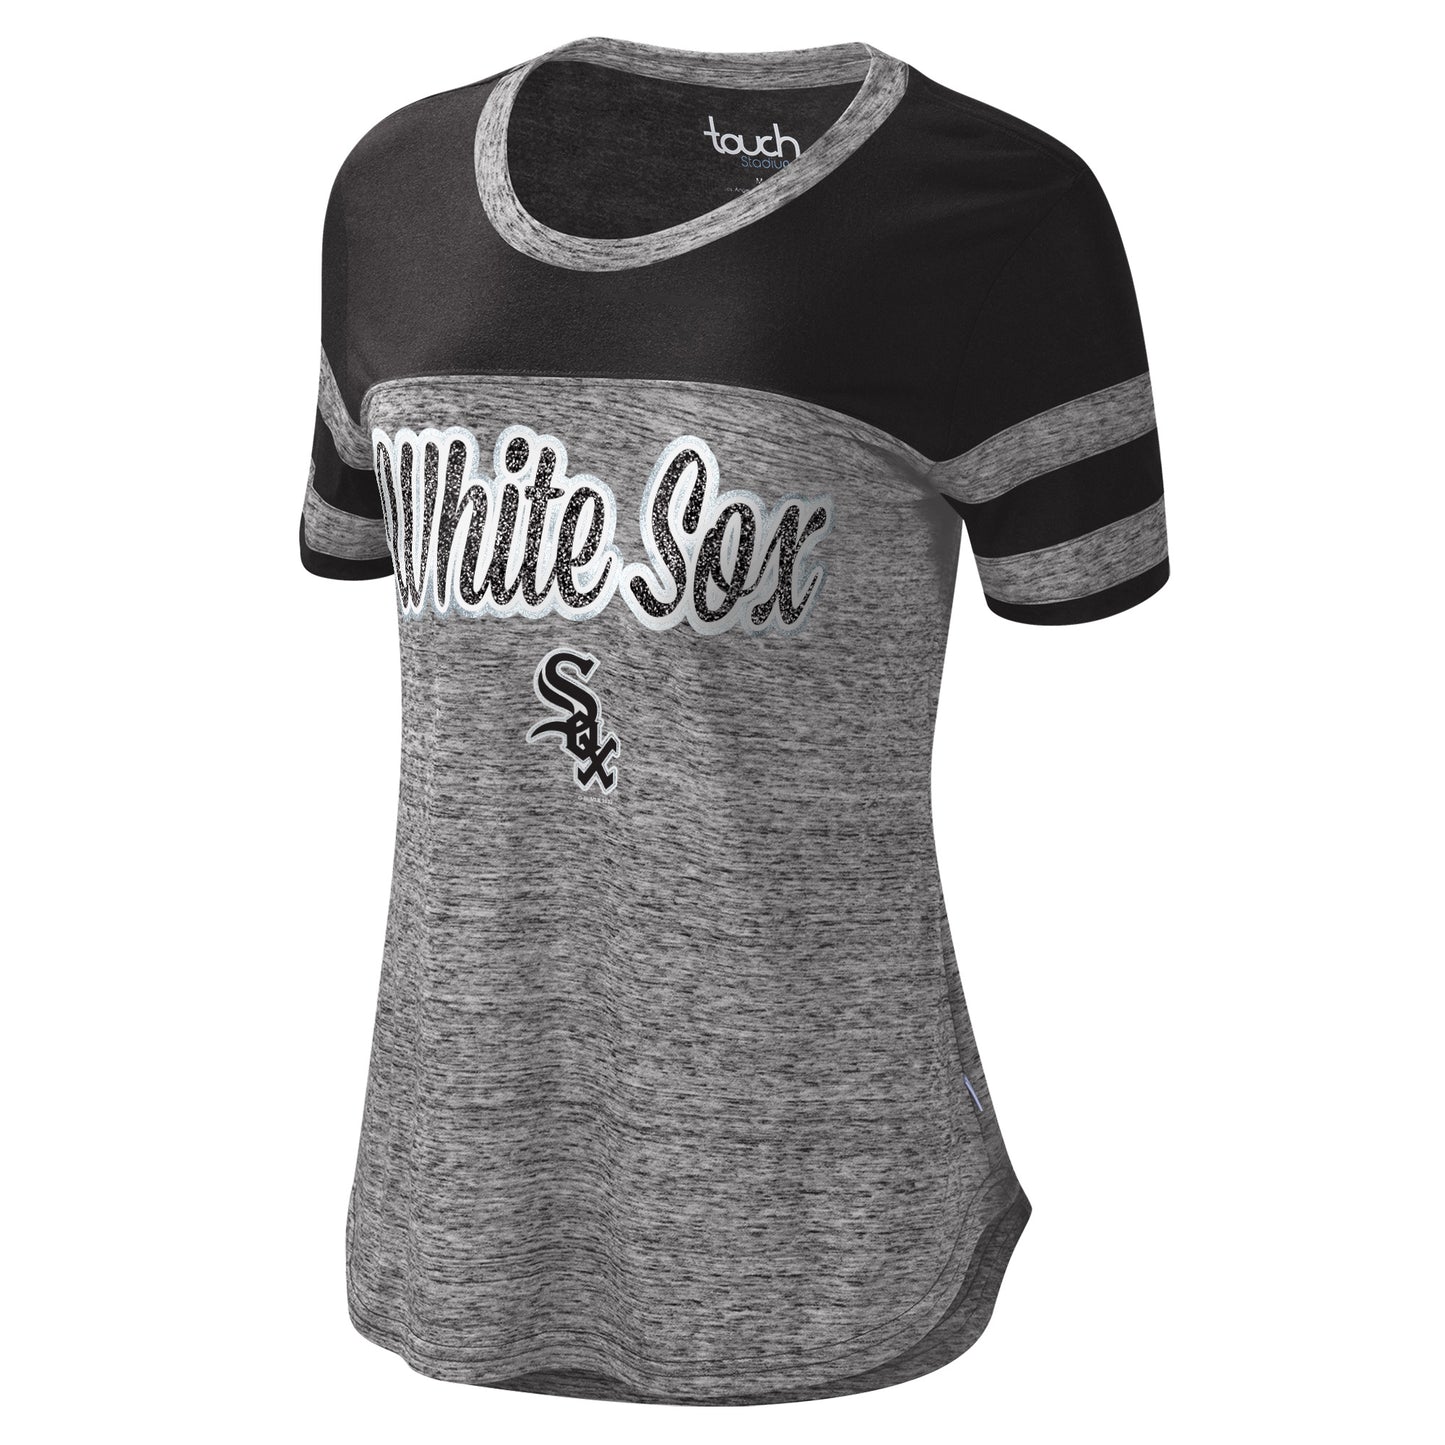 Women's Chicago White Sox Touch Stadium Gray Knit Tee